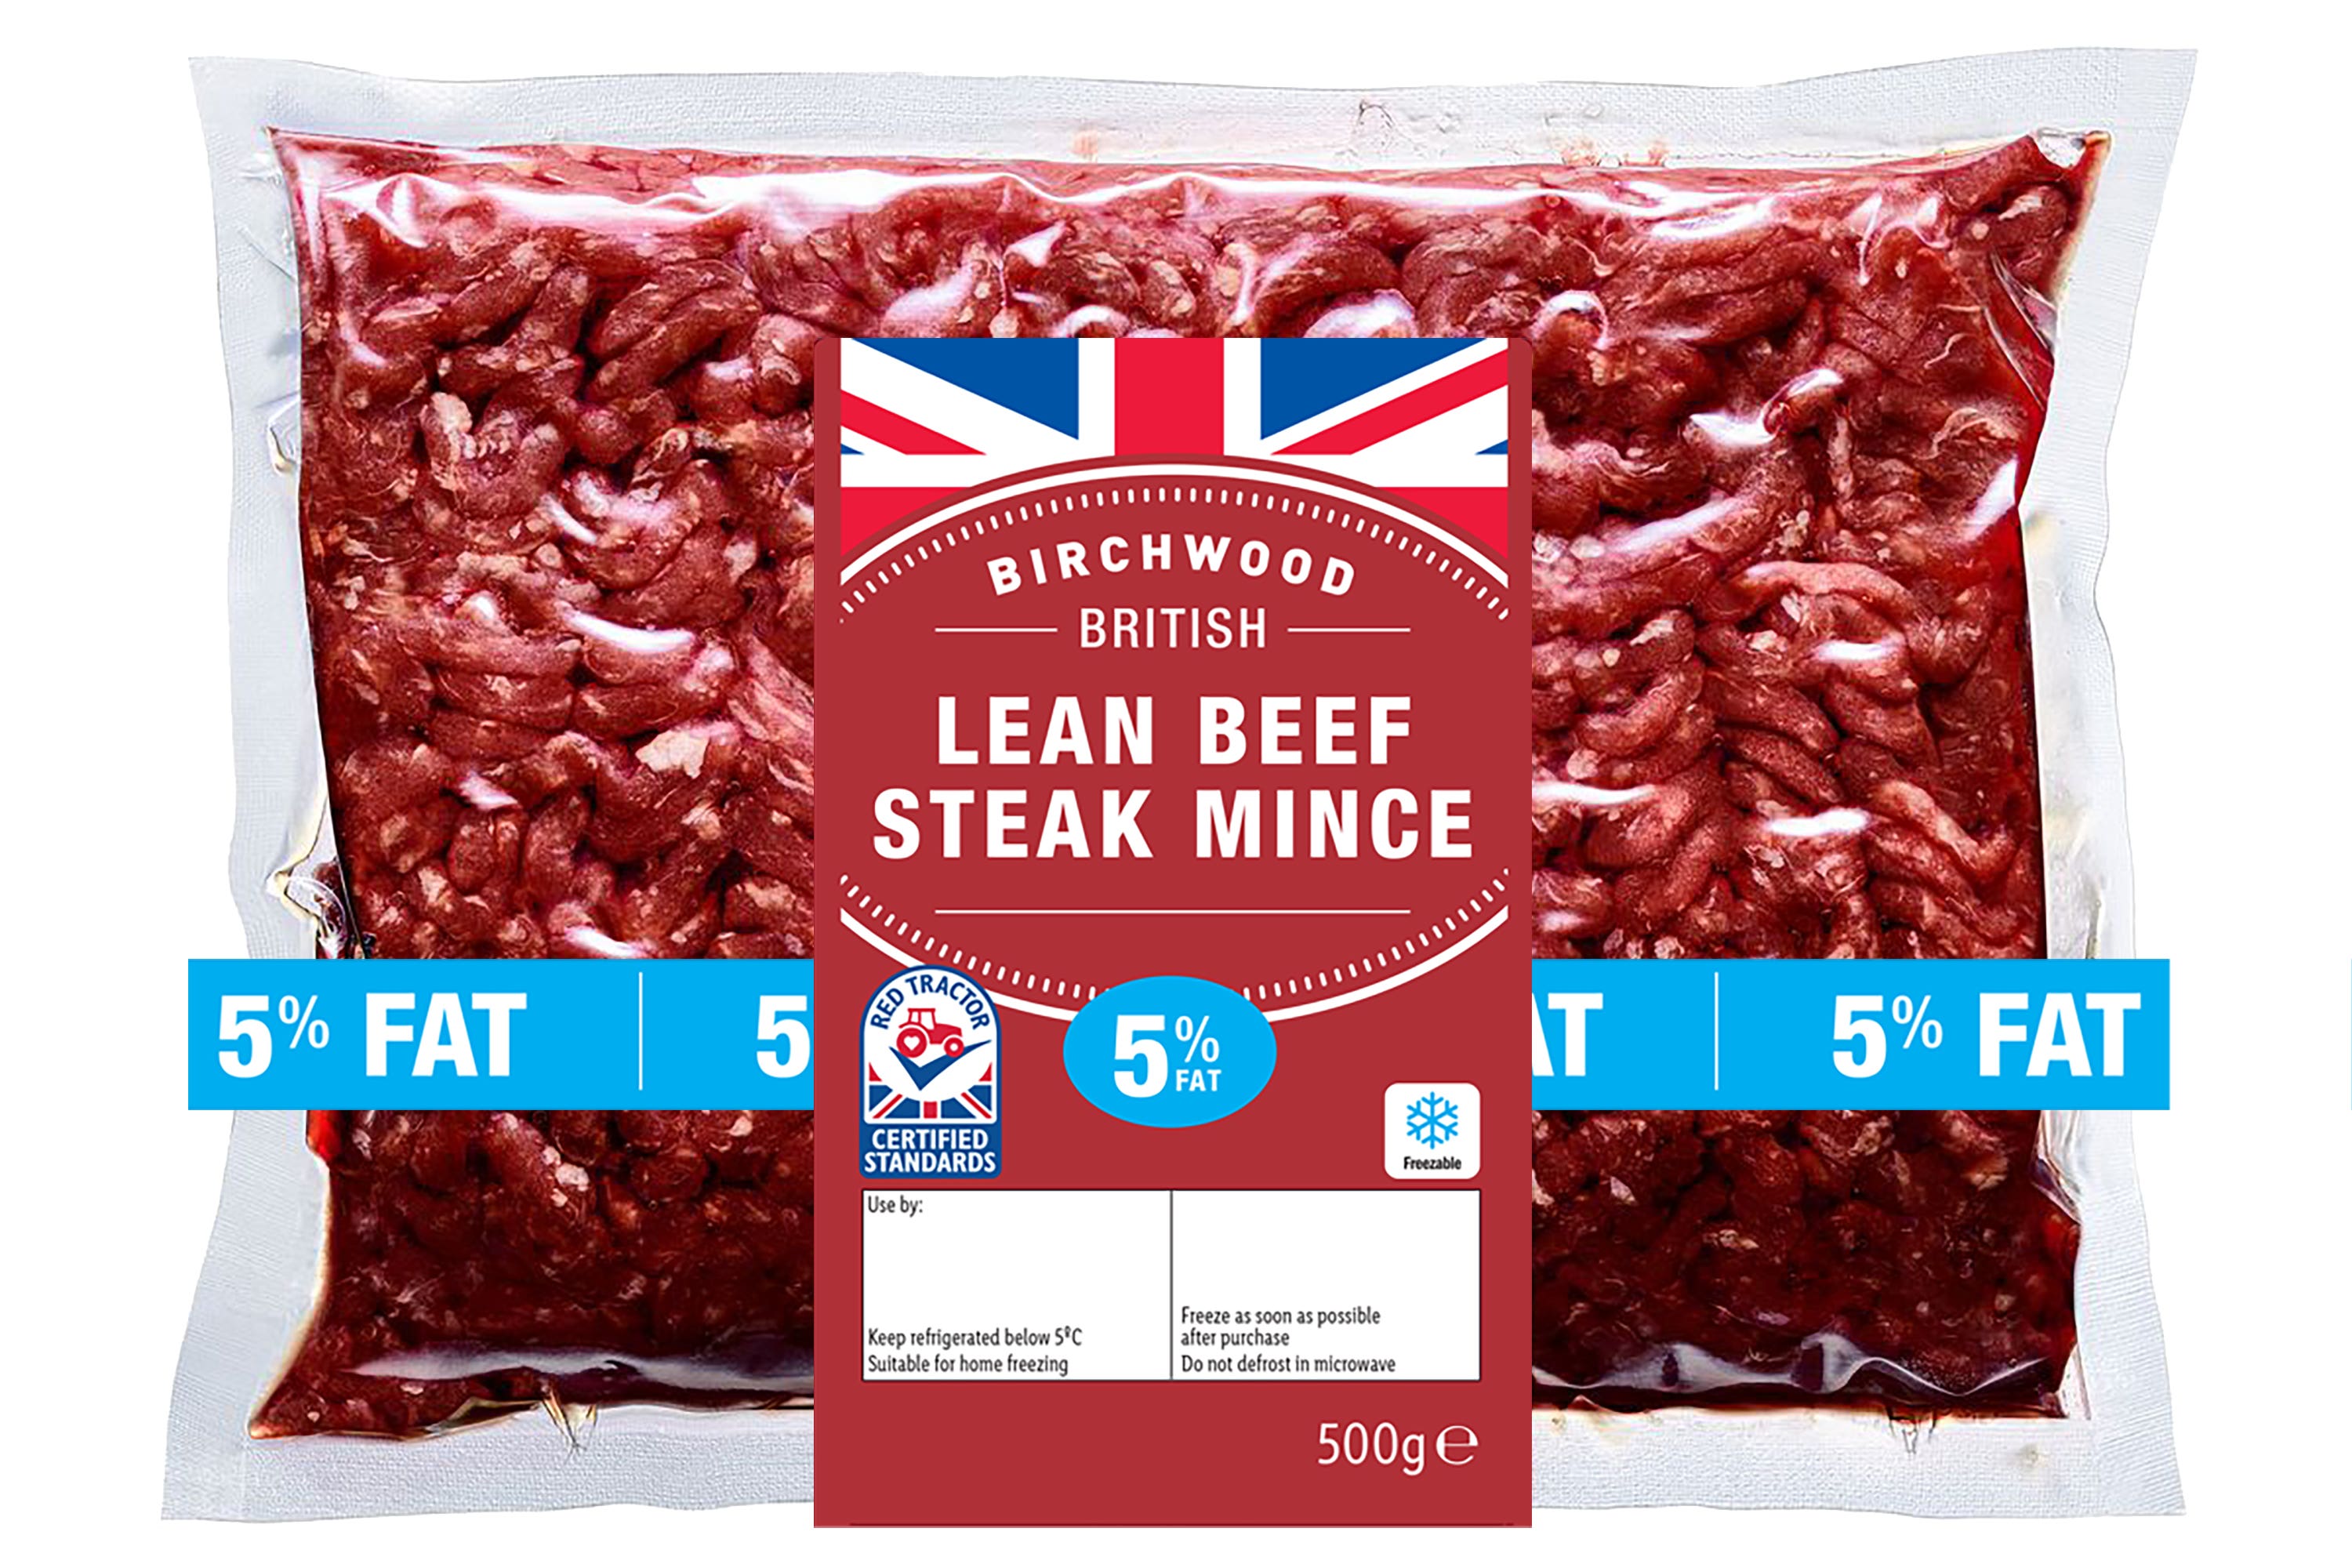 Lidl has become the latest supermarket to introduce vacuum-packed mince to cut plastic waste (Lidl/PA)